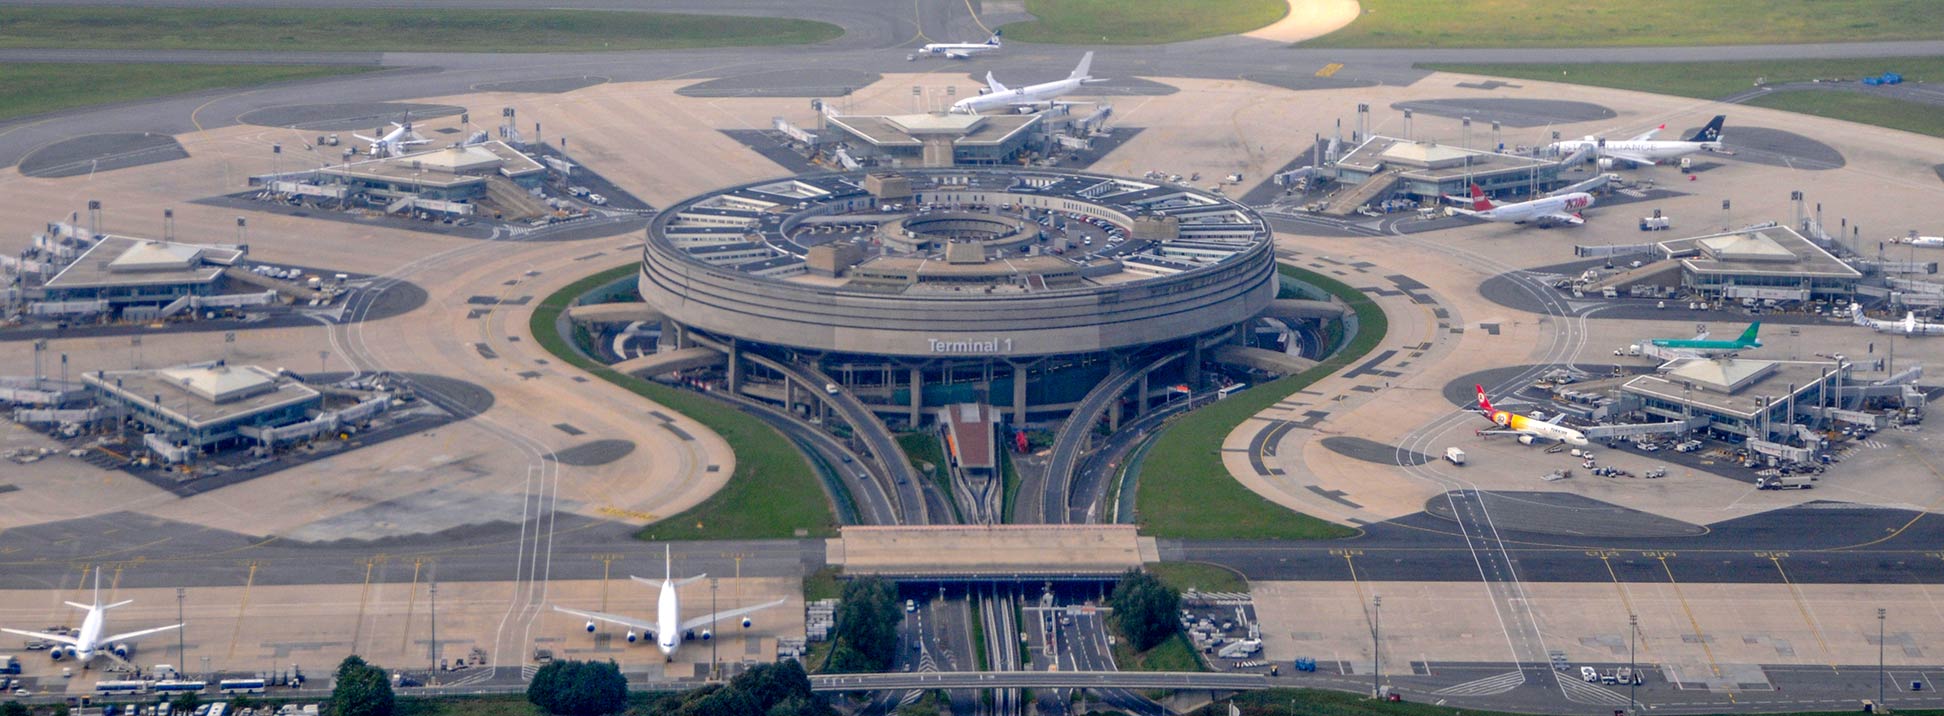 Top 10 Biggest Airports in Europe | ASAPtickets travel blog